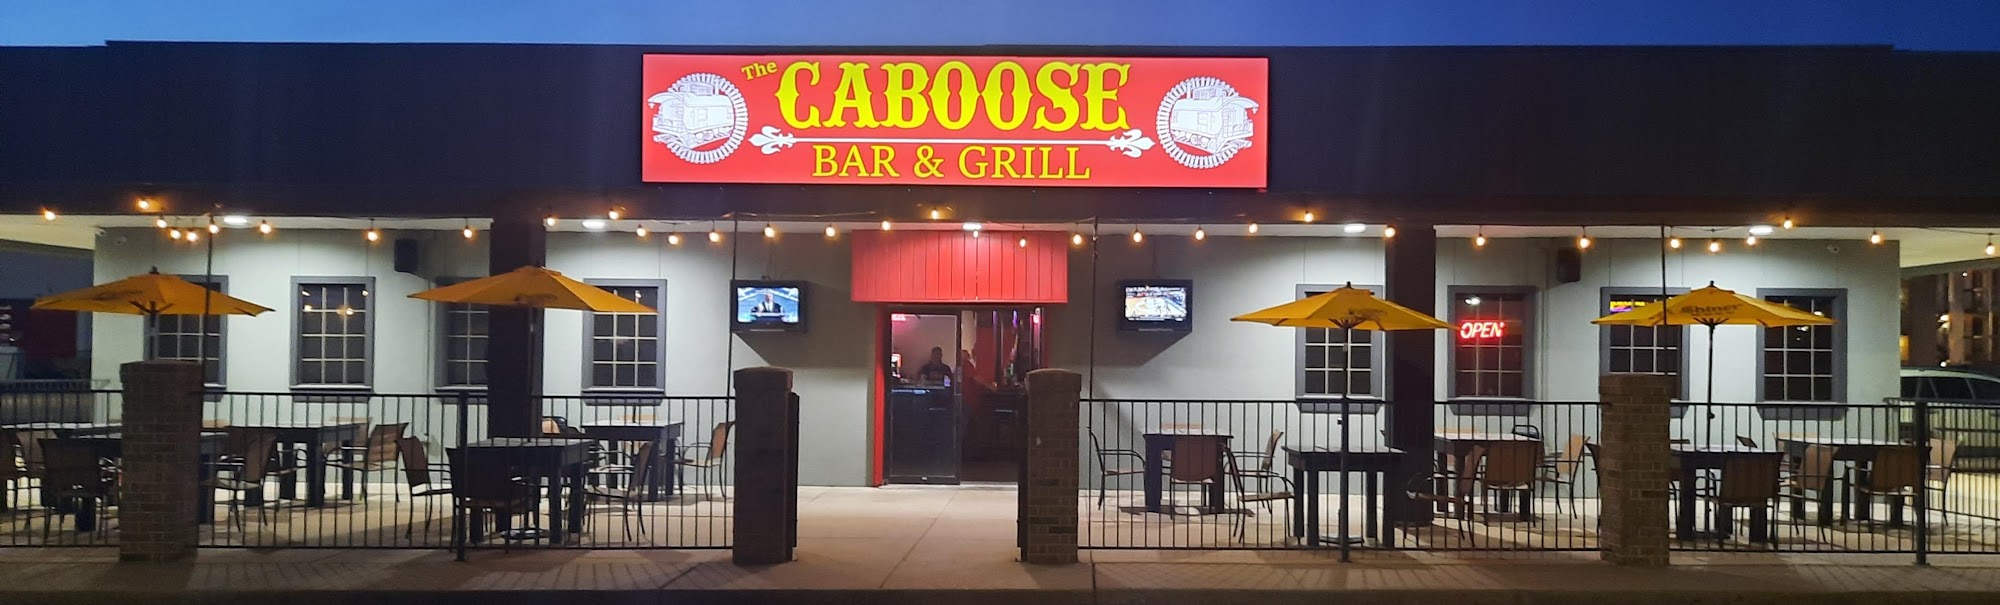 The Caboose Bar & Grill